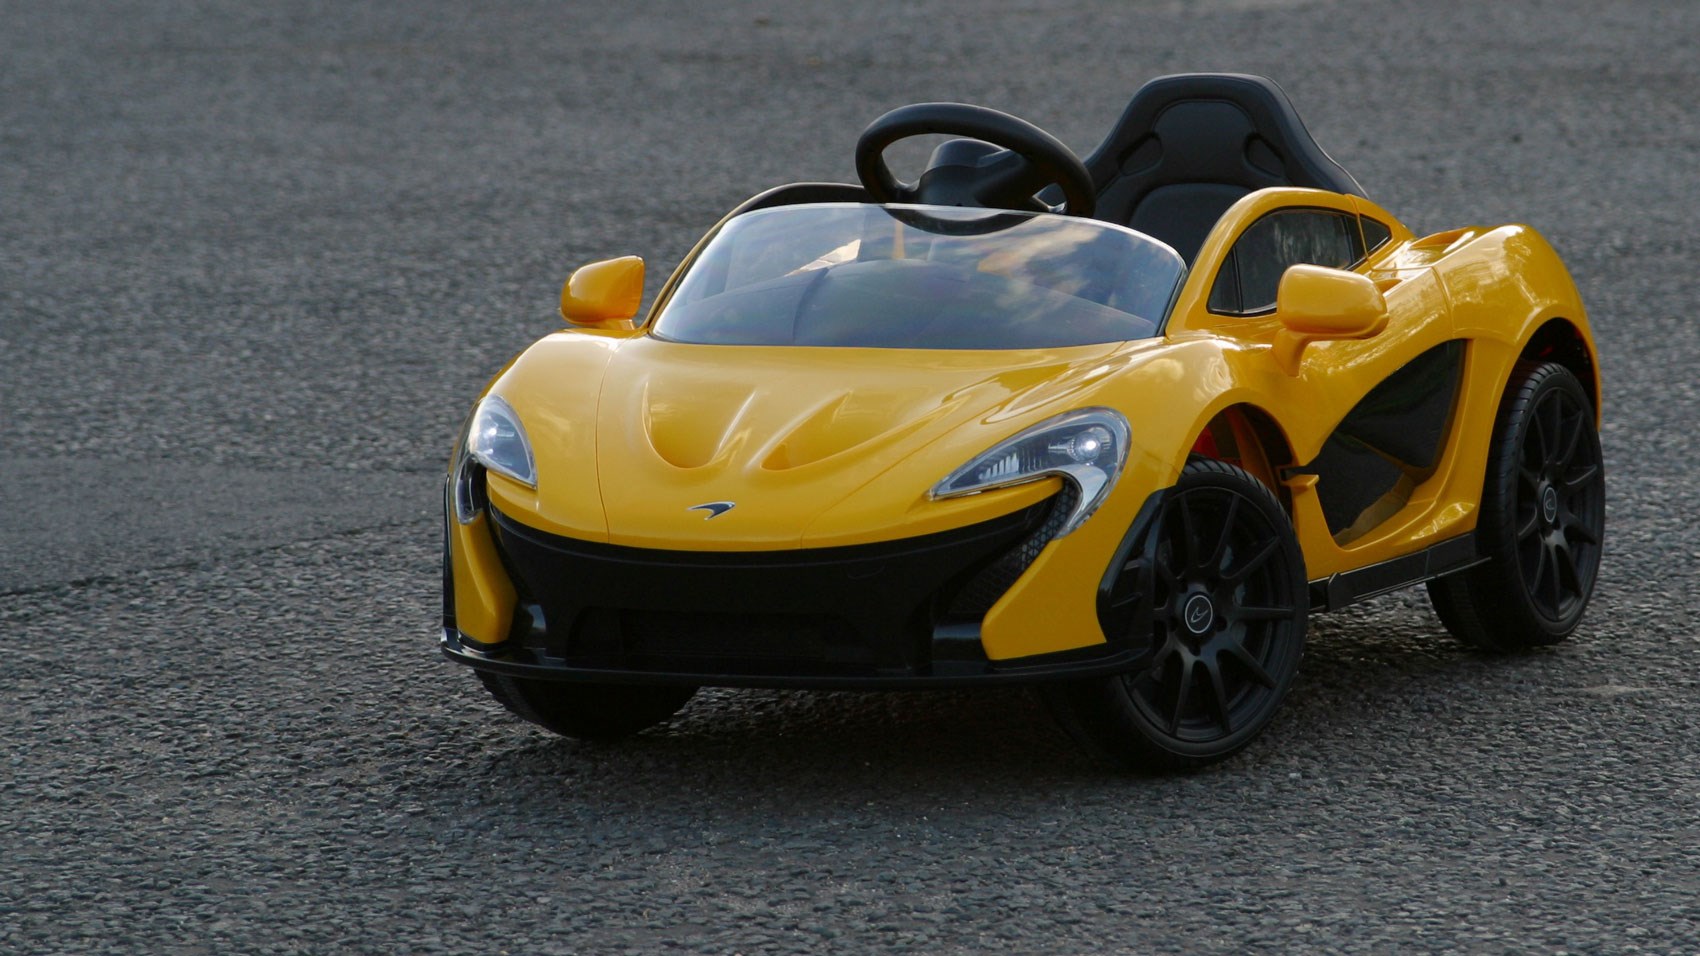 Remarkably accurate styling mimics the real McLaren P1's